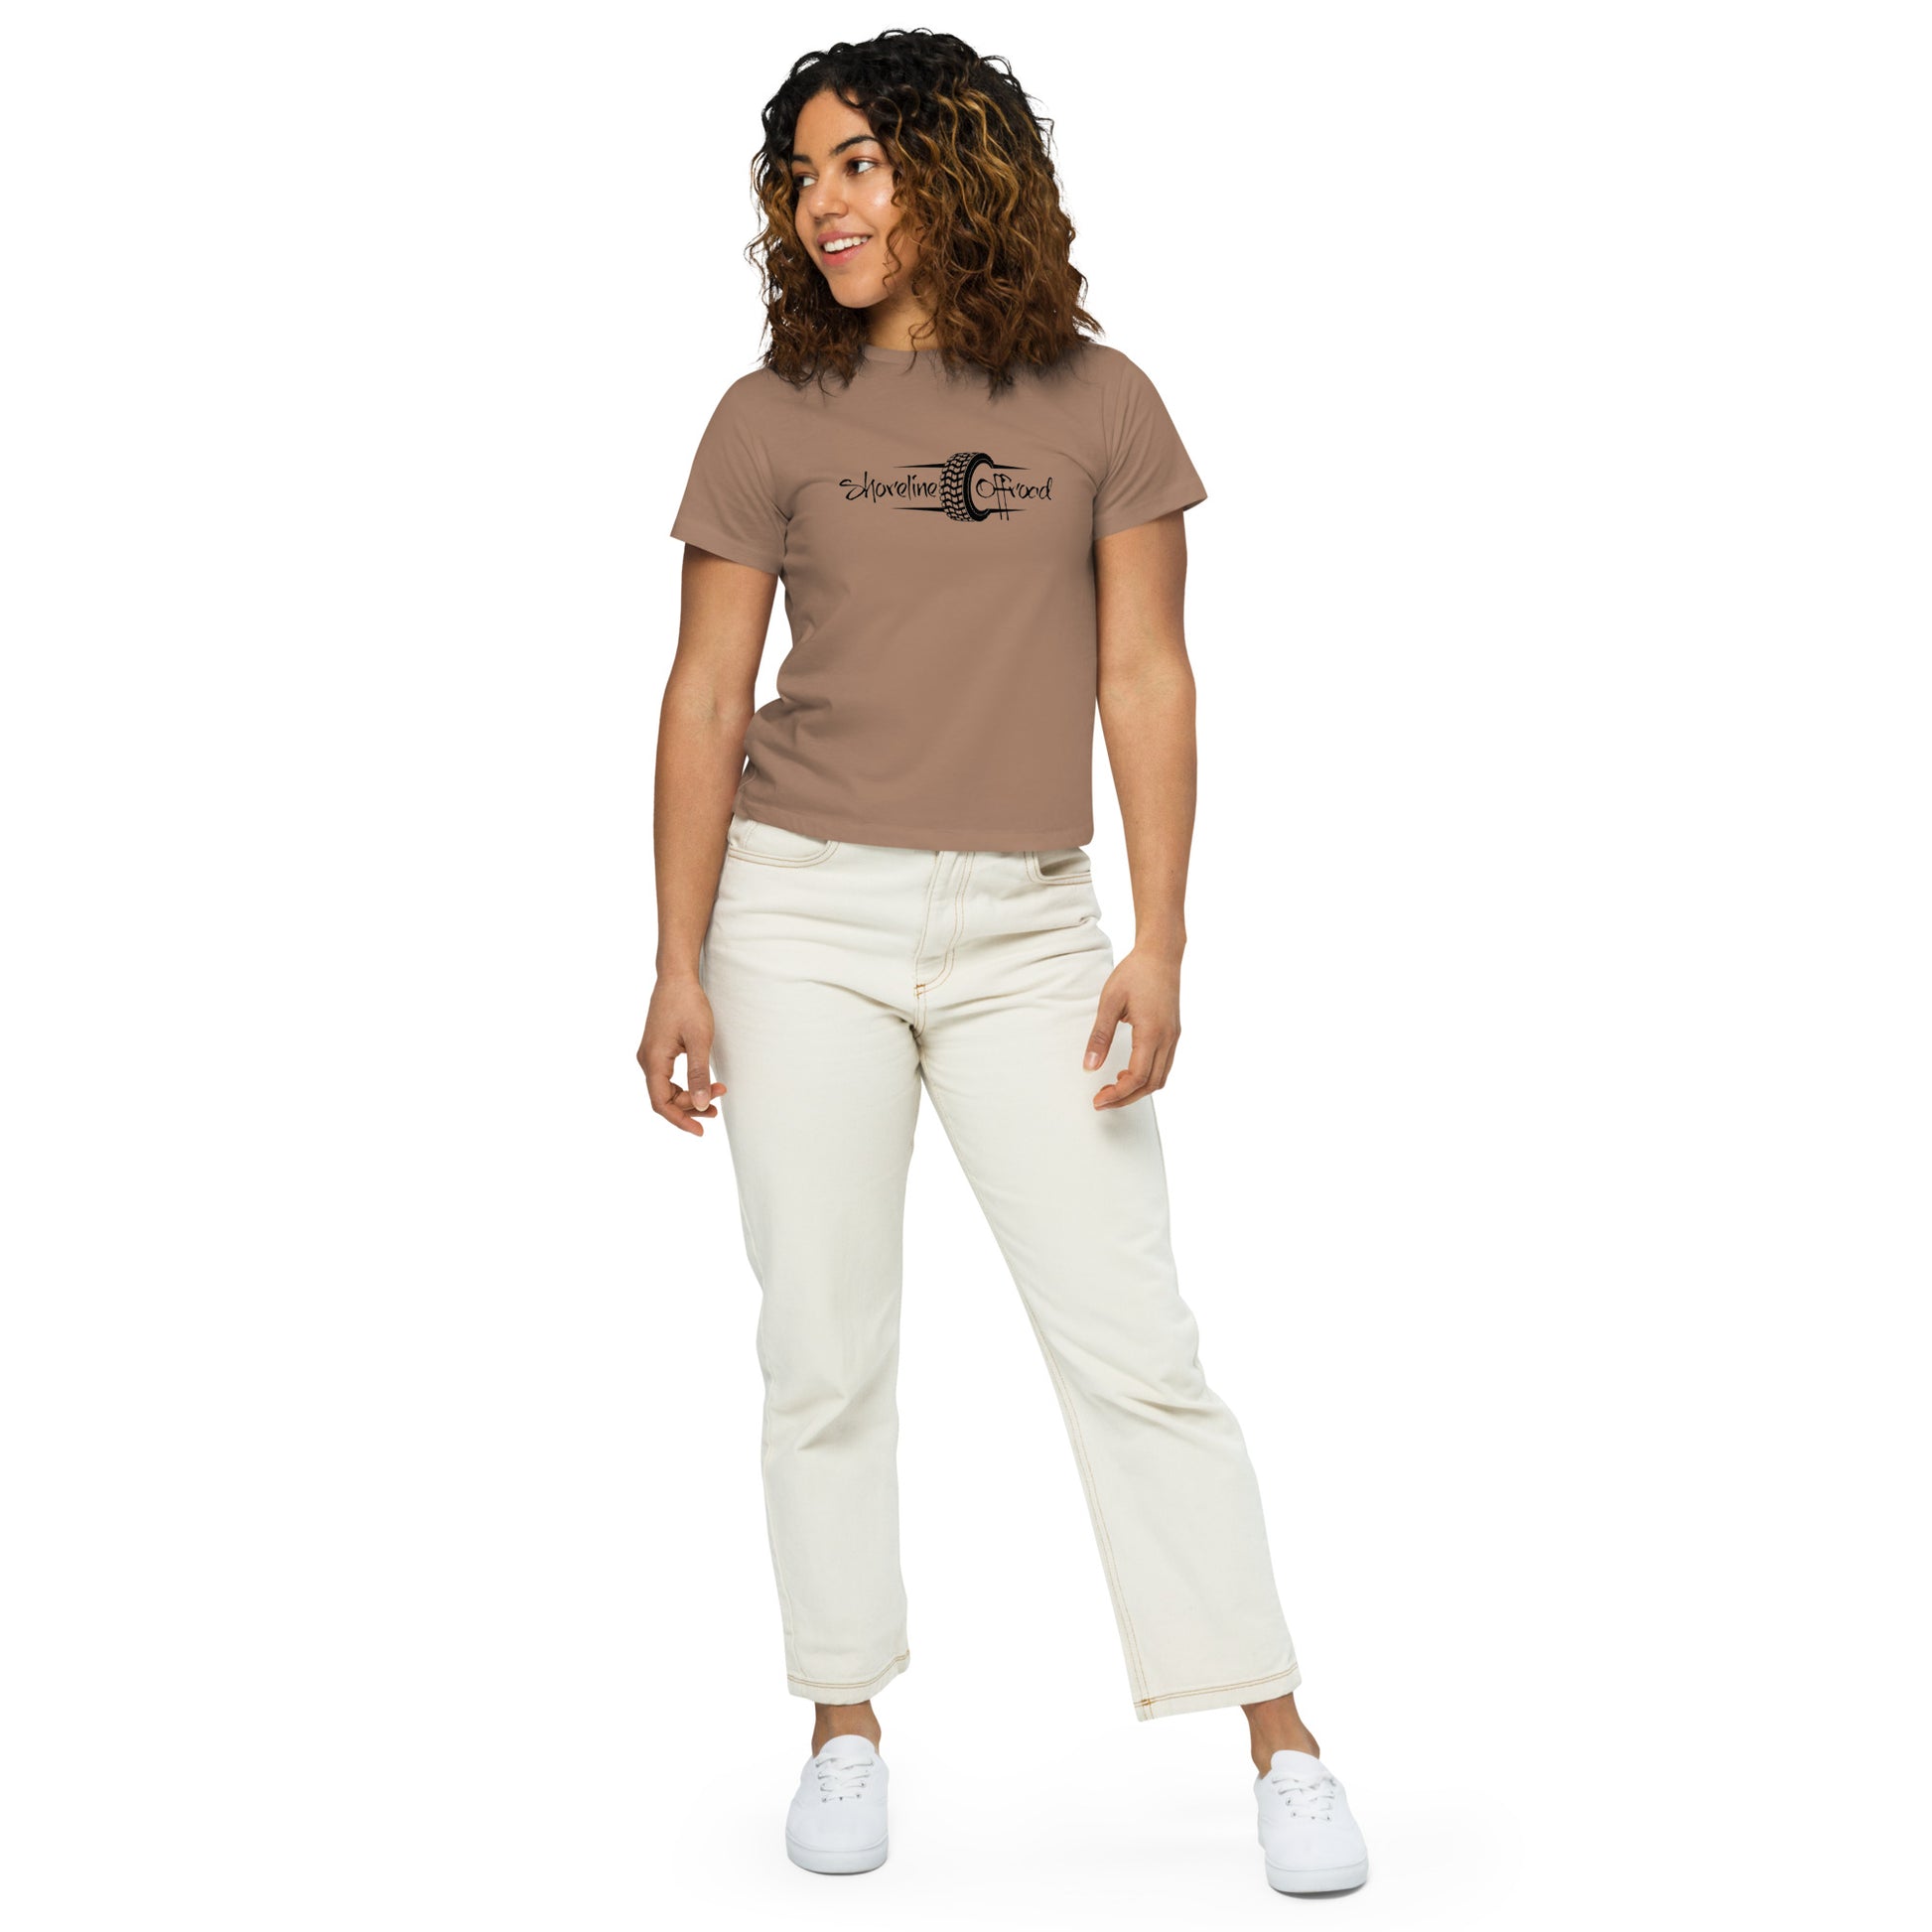 a woman wearing a brown shirt and white pants